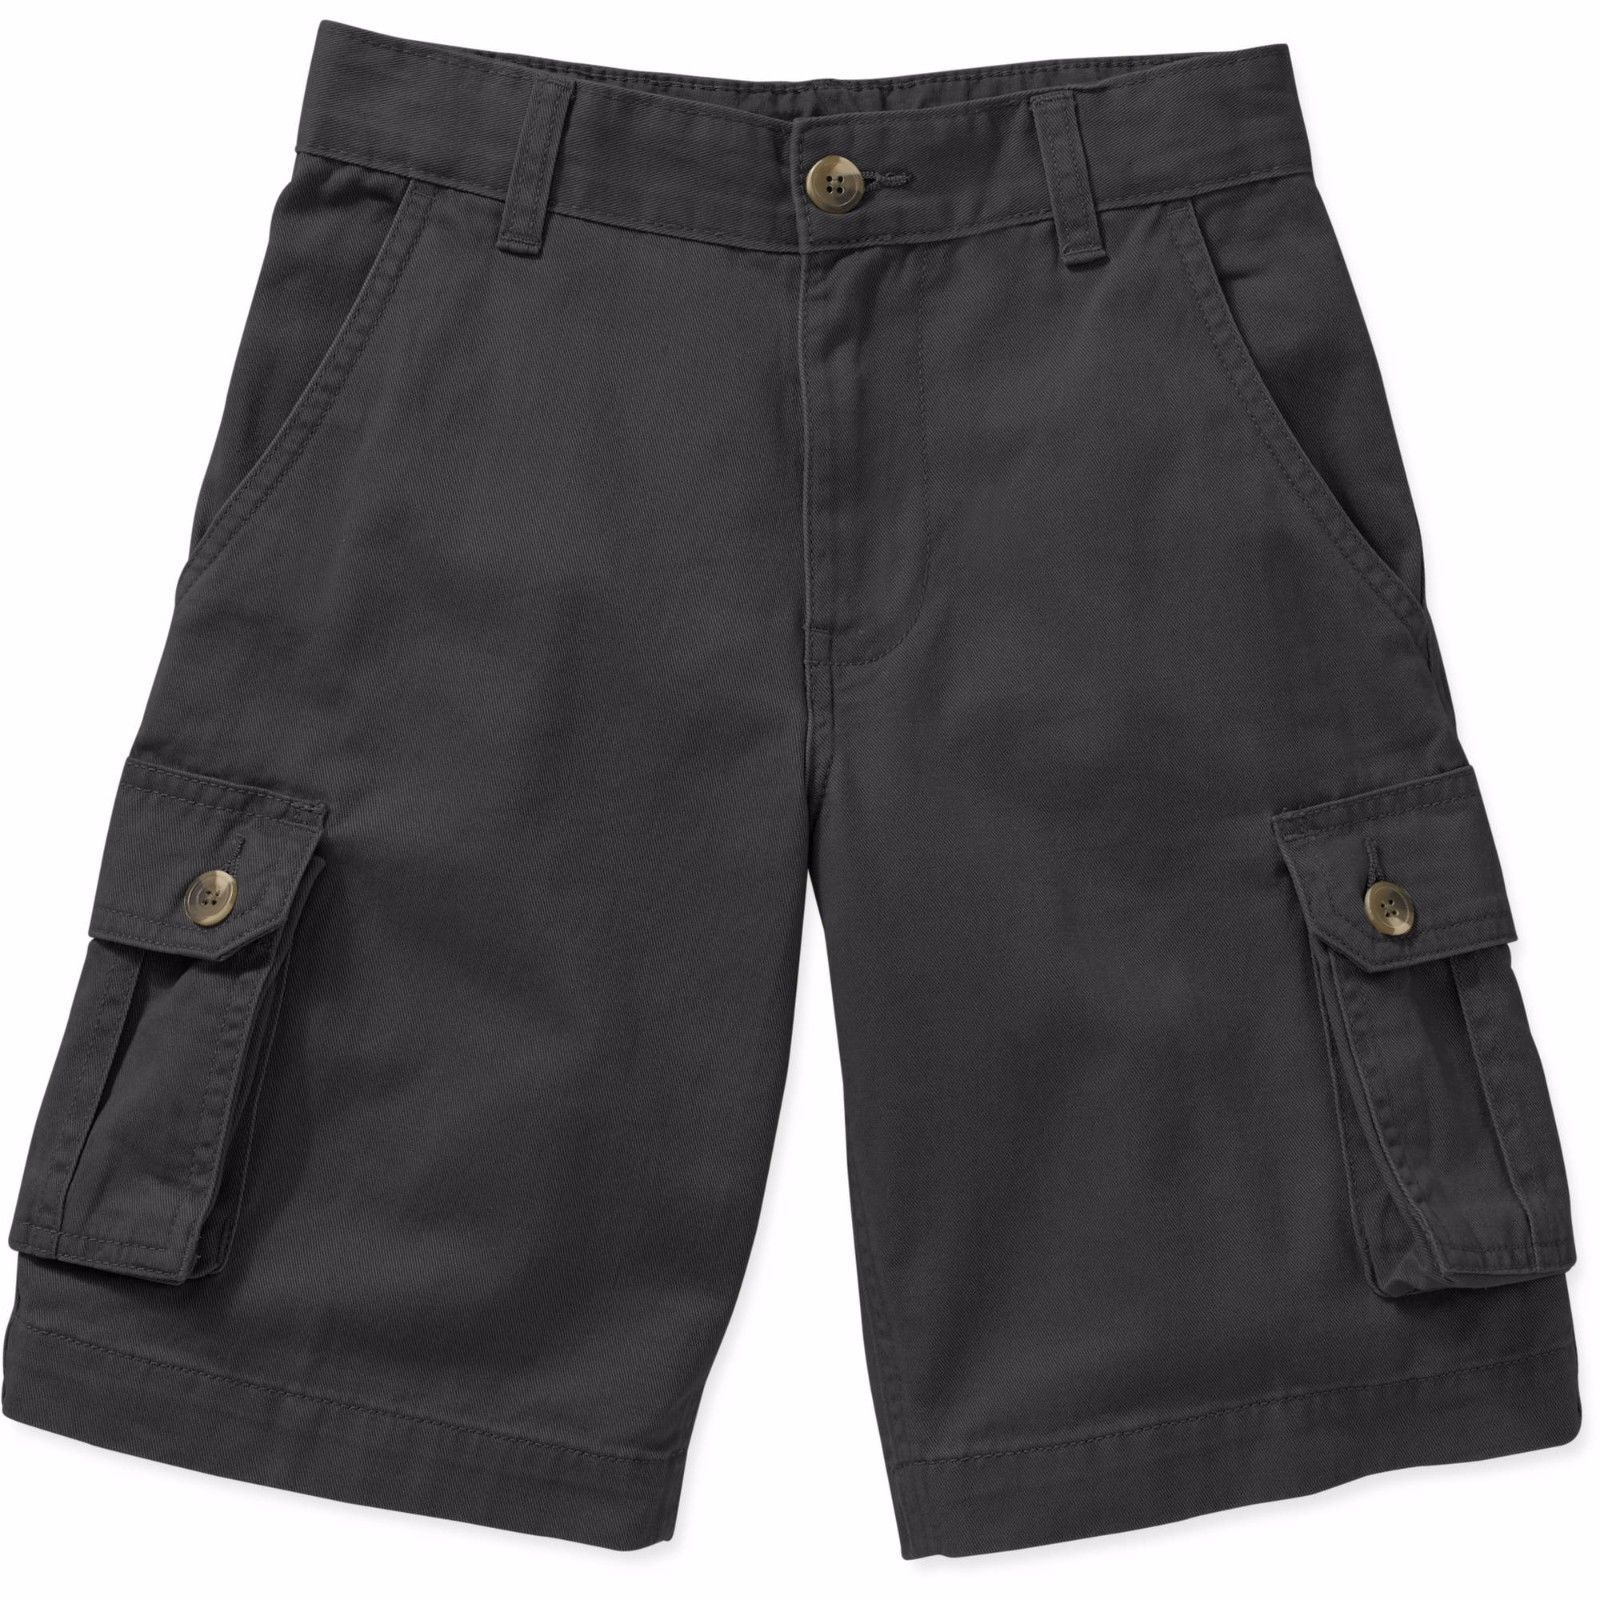 Faded Glory Boys Solid Cargo Shorts Black Soot Size 5 NEW - $12.86